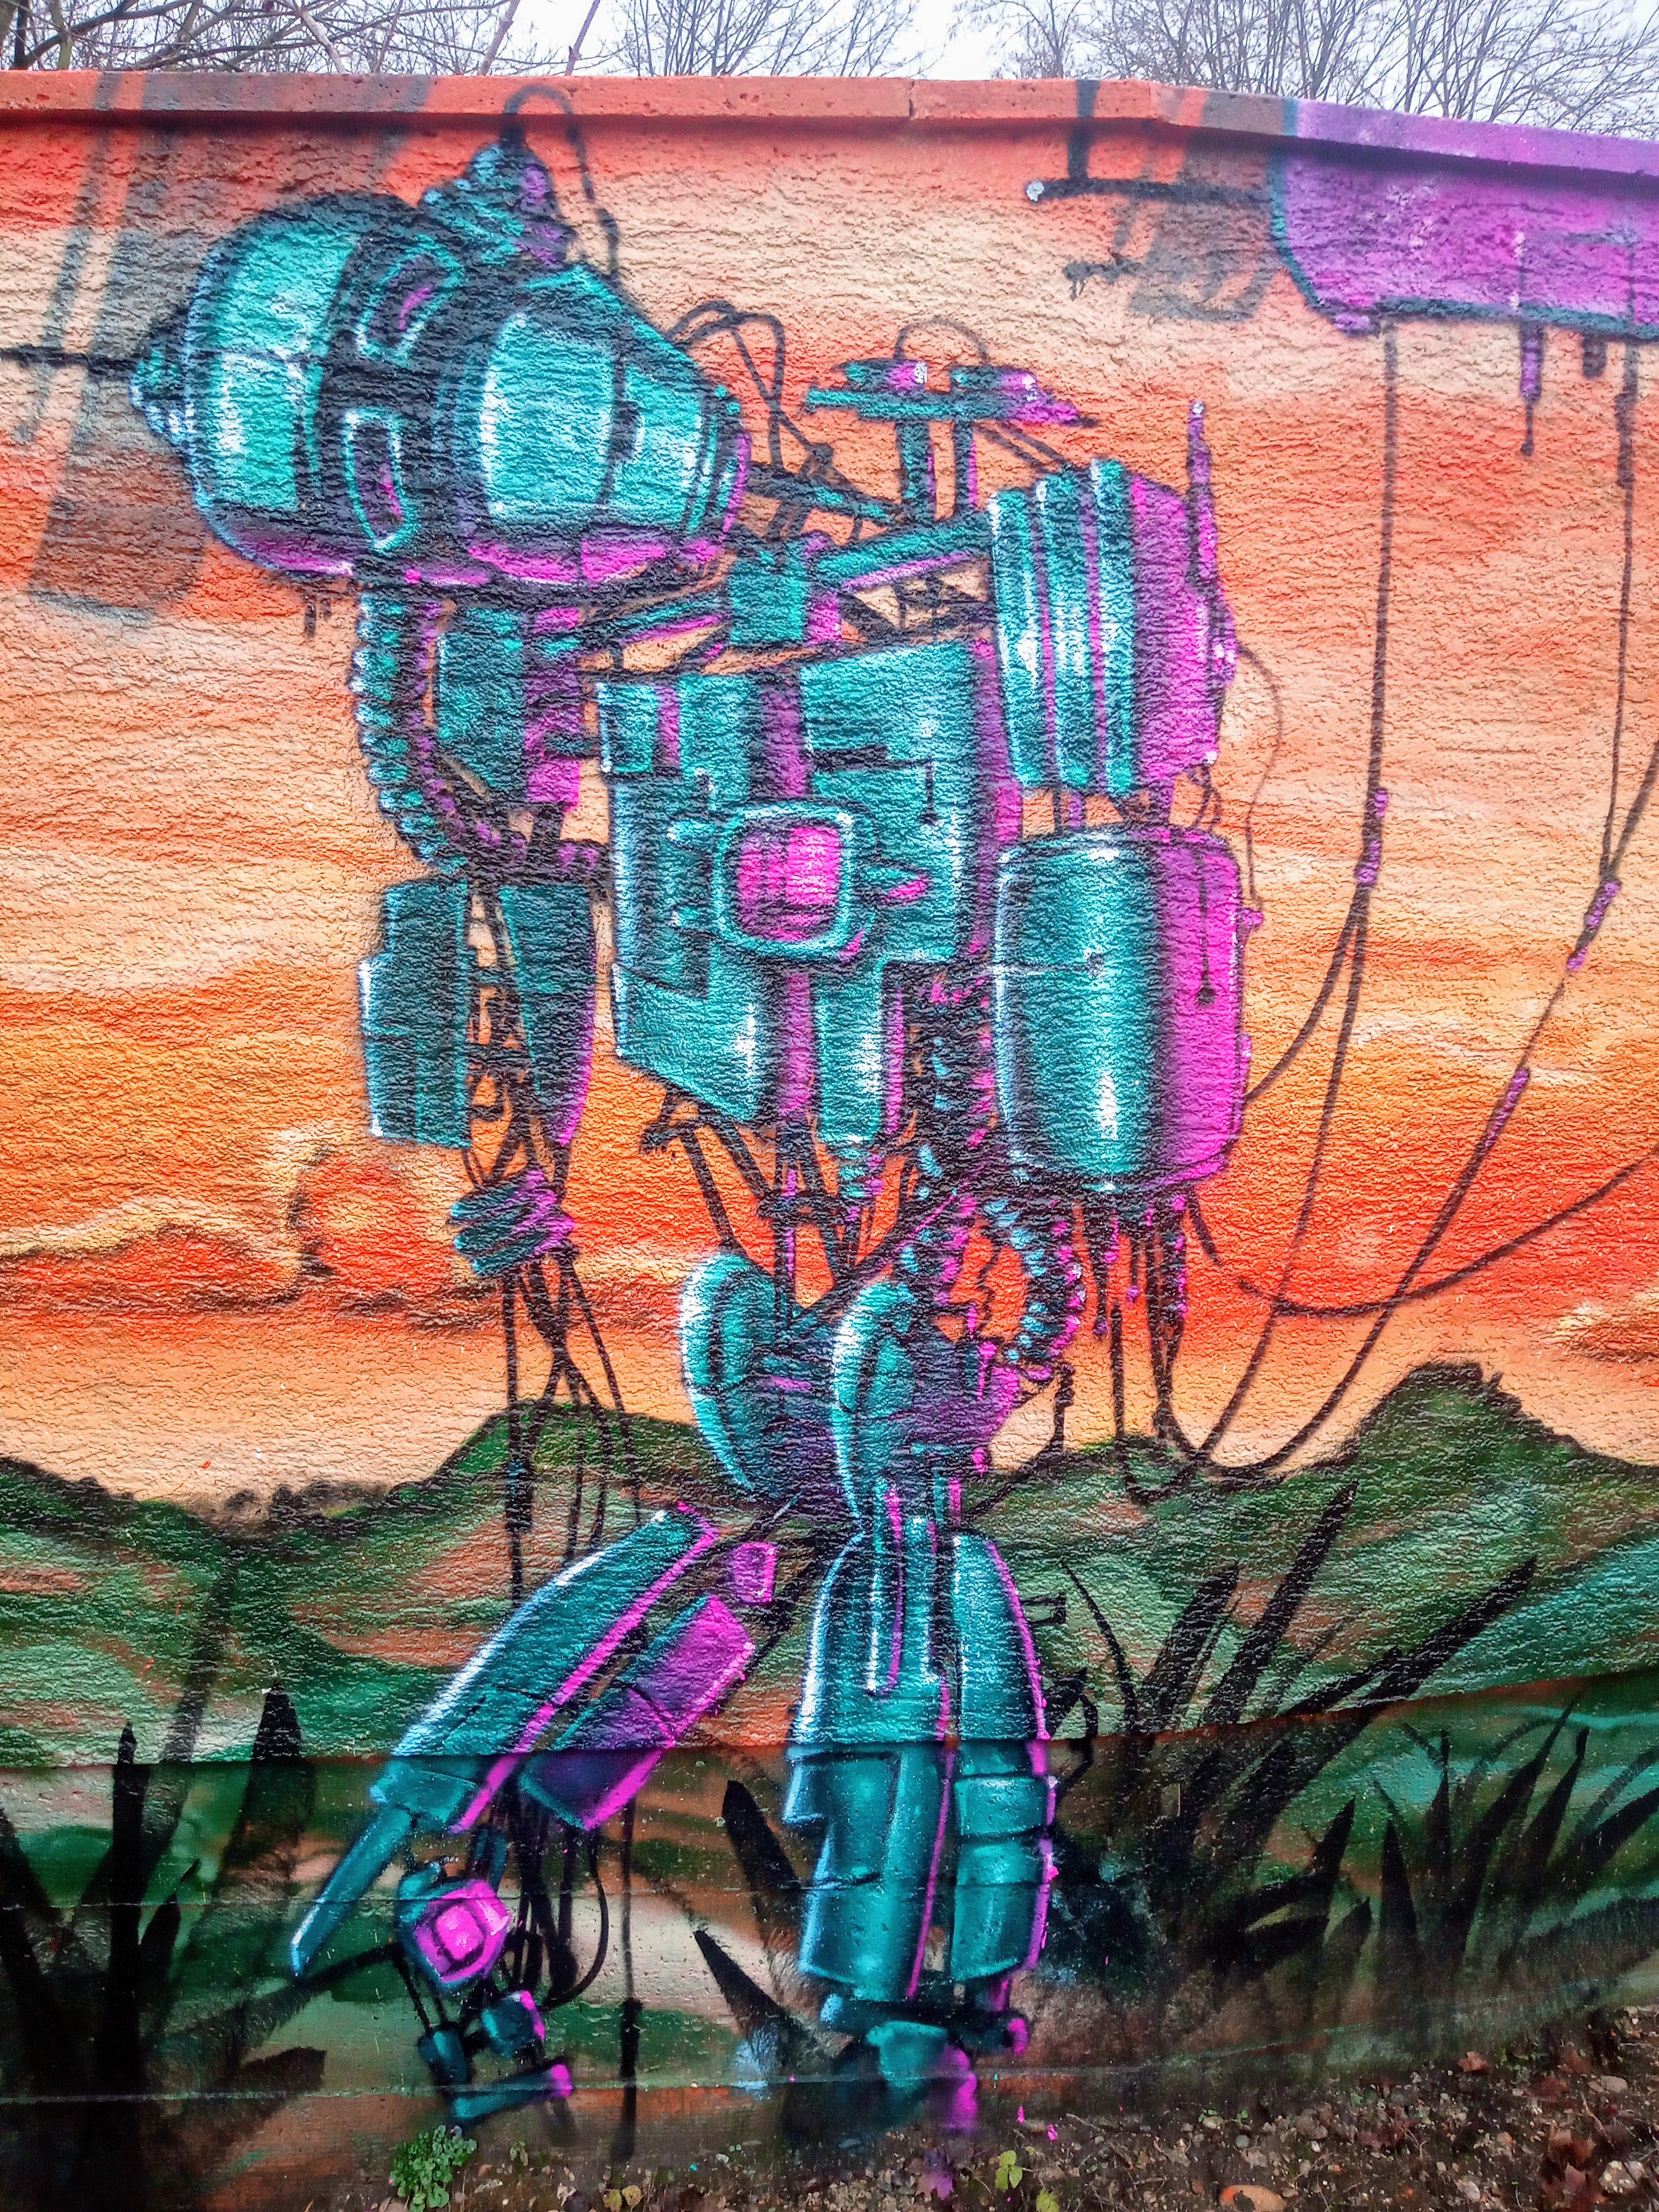 Alone robot ... spray paint in Augsburg, Germany